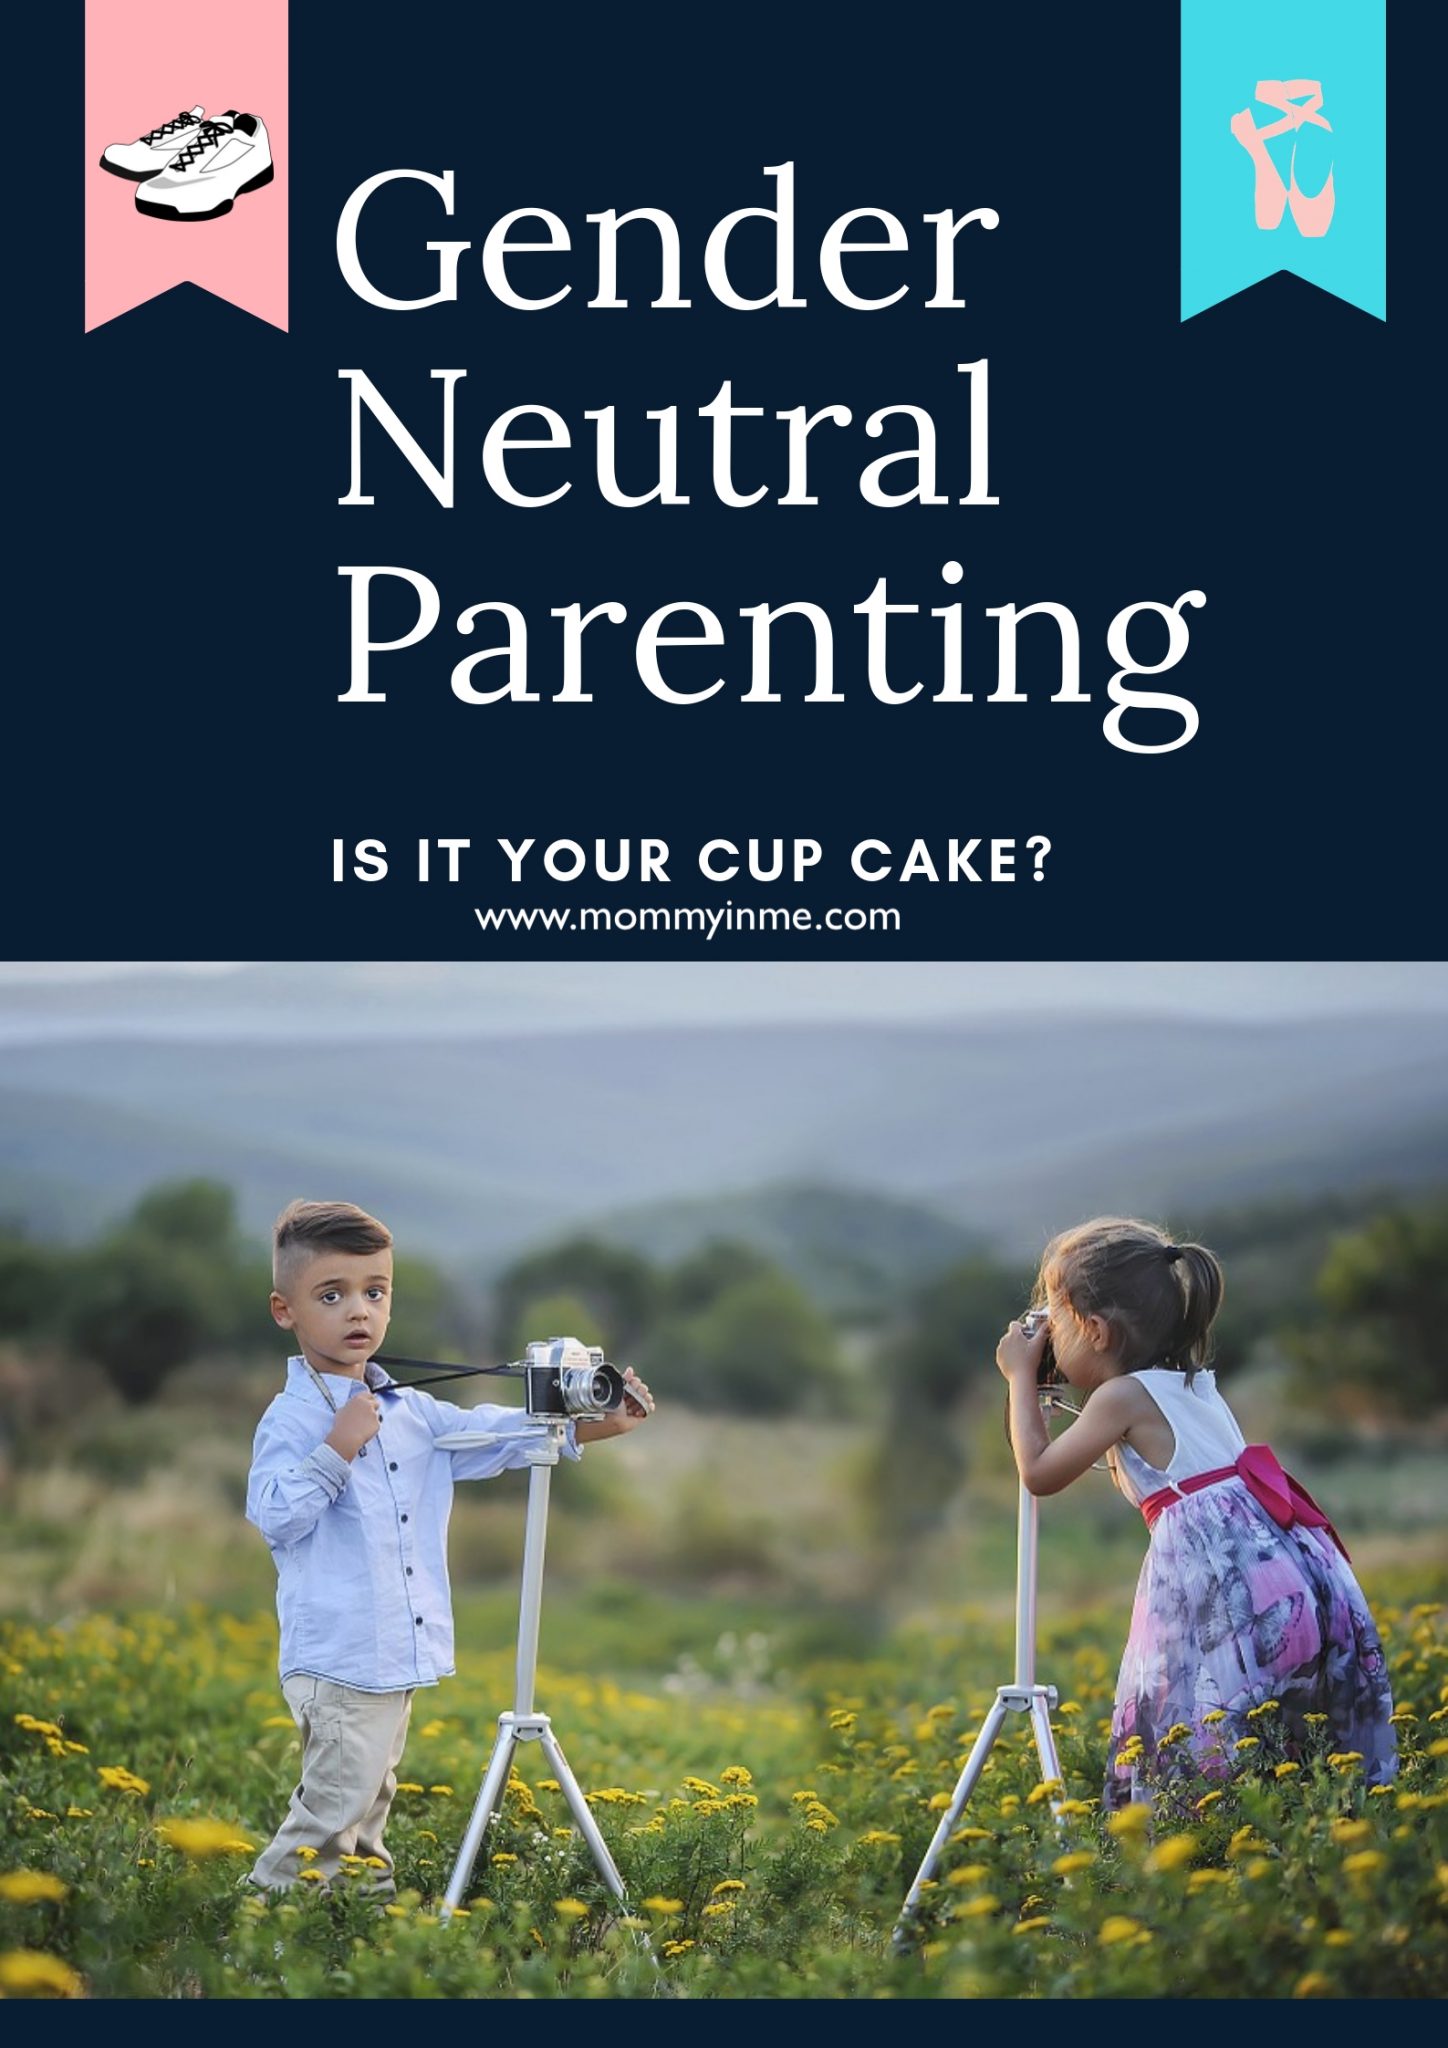 Are you a gender neutral parent? What does gender Neutral Parenting means? Kids who are raised in gender neutral environment have access to many more opportunities, have better imaginative powers, and are at lower risk on mental health issues during adolescence. #parenting #genderneutrality #equality #raisingkids #raisingchildren #positiveparenting